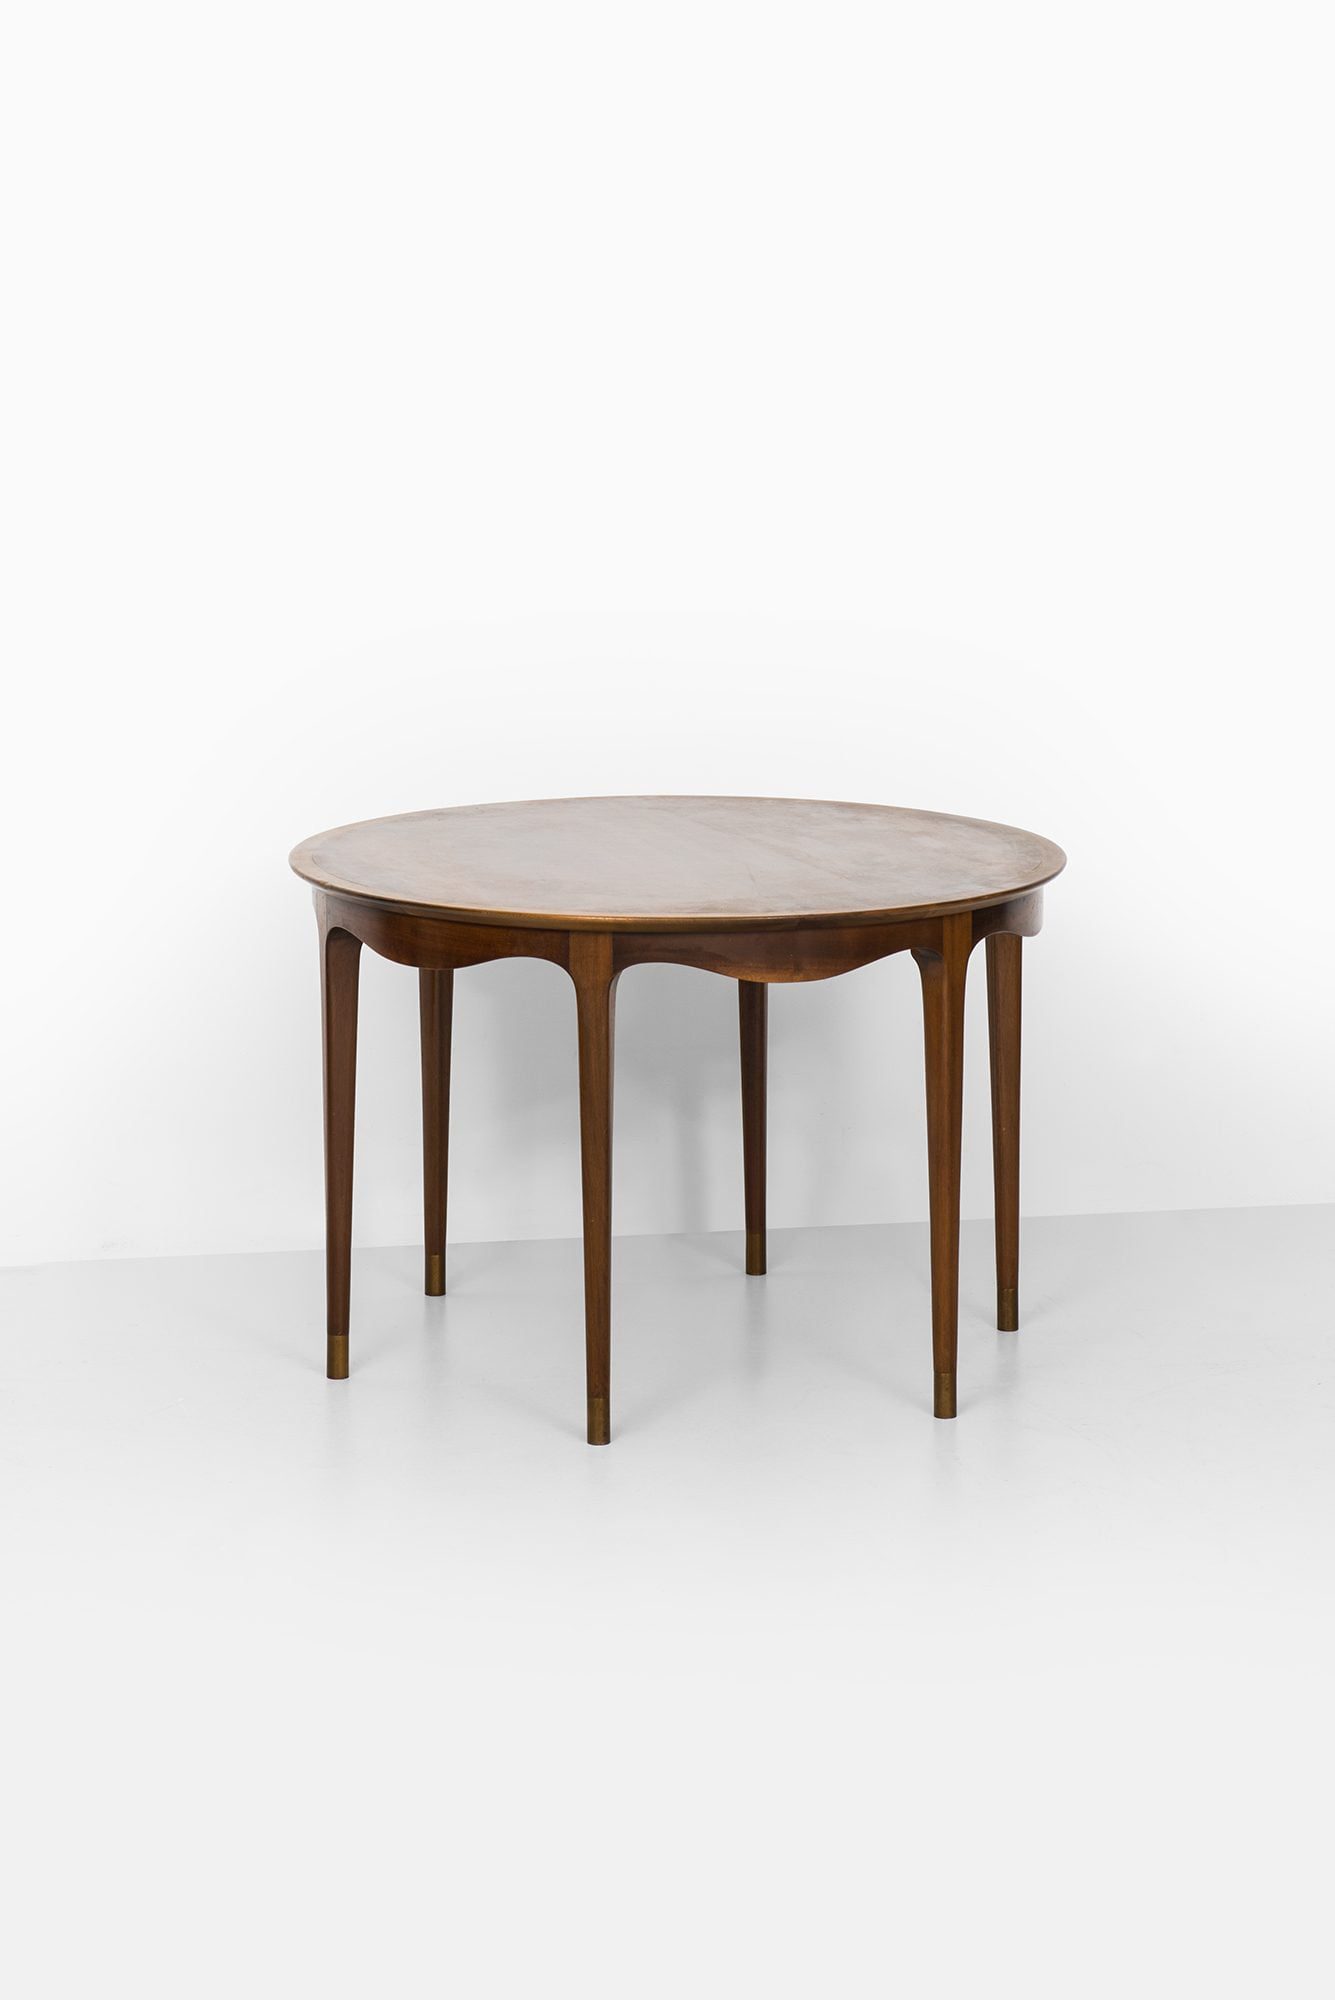 Ole Wanscher side table by A.J. Iversen at Studio Schalling